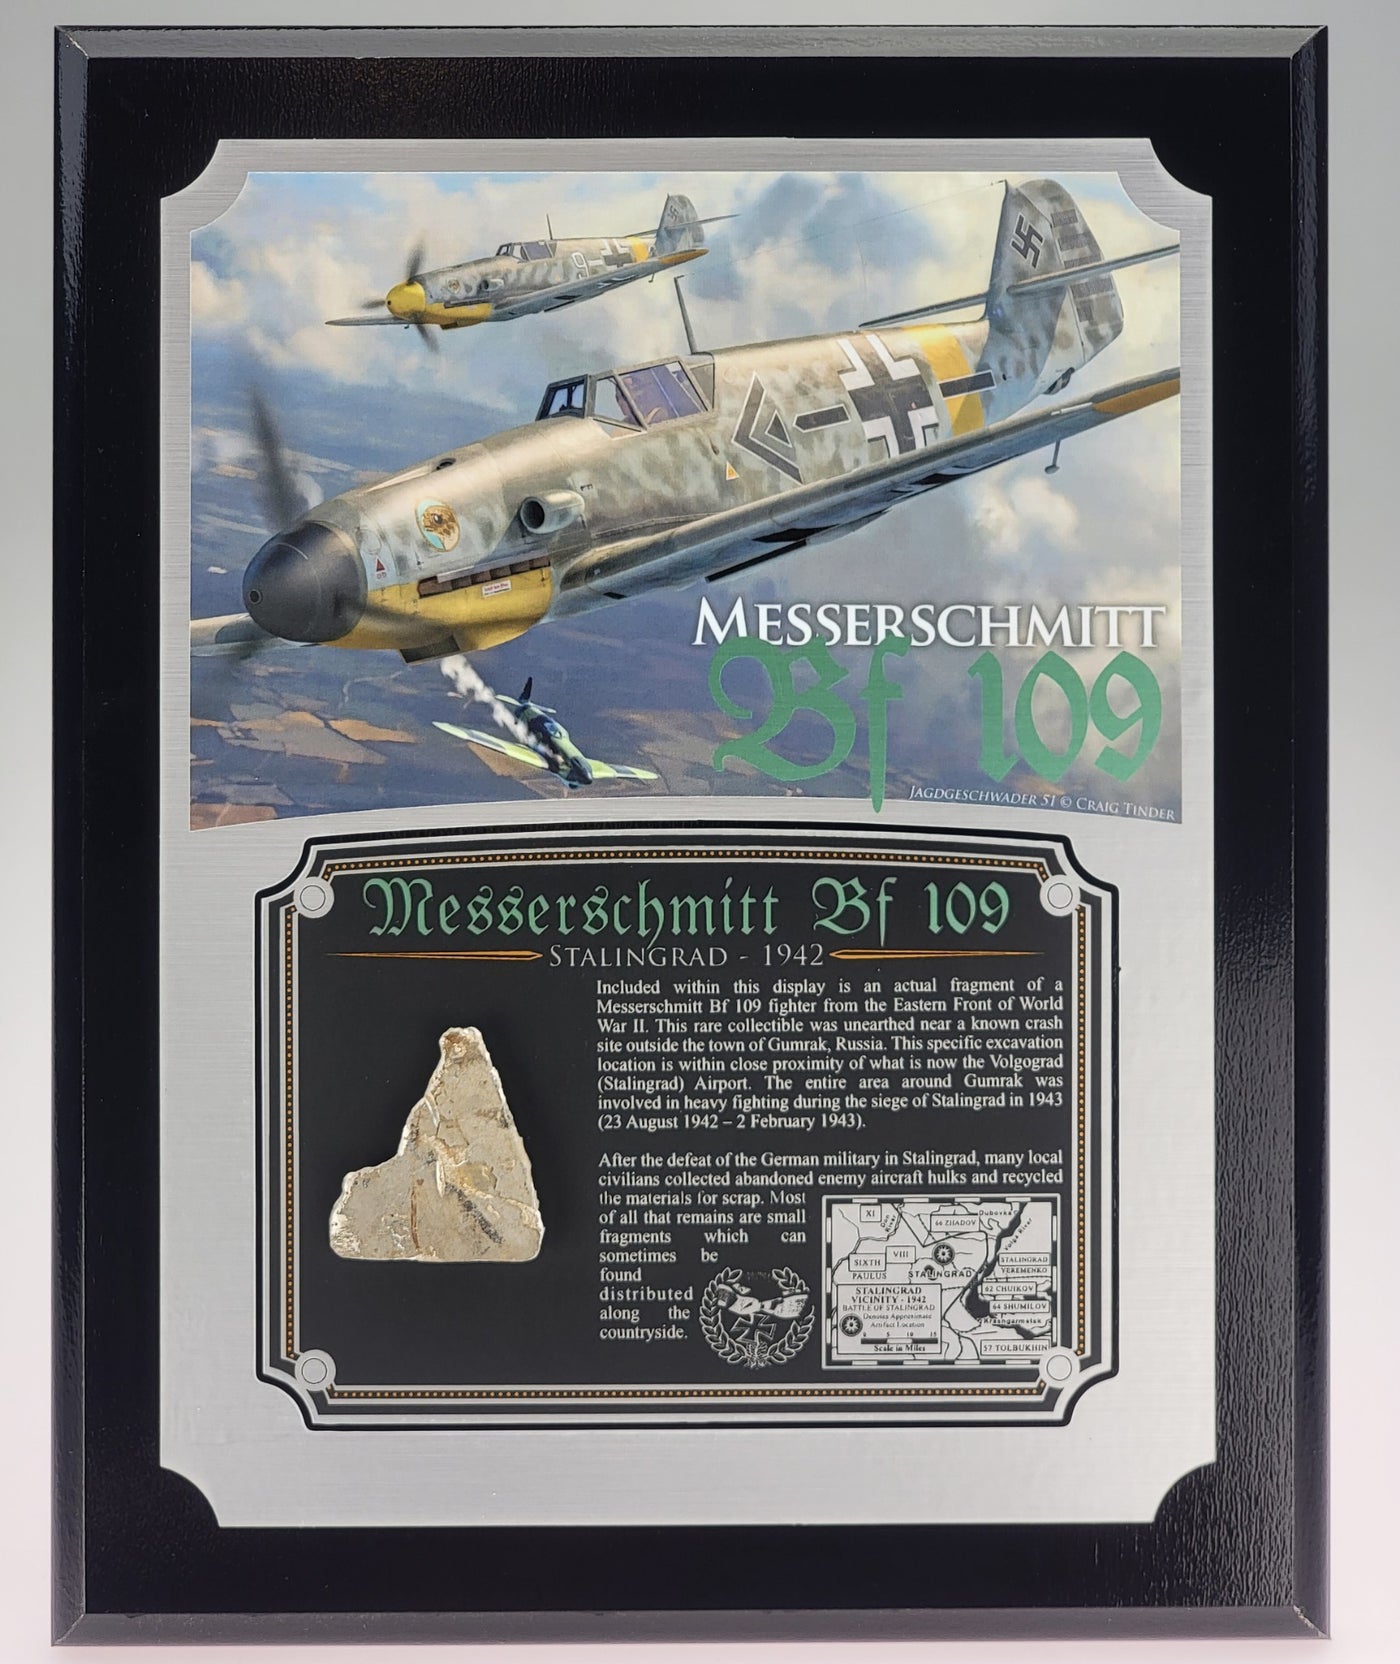 WWII Messerschmitt Bf 109 Relic Plaque - Full Color 8"x10"-Historical Display Plaques-Aces In Action: The Workshop of Artist Craig Tinder